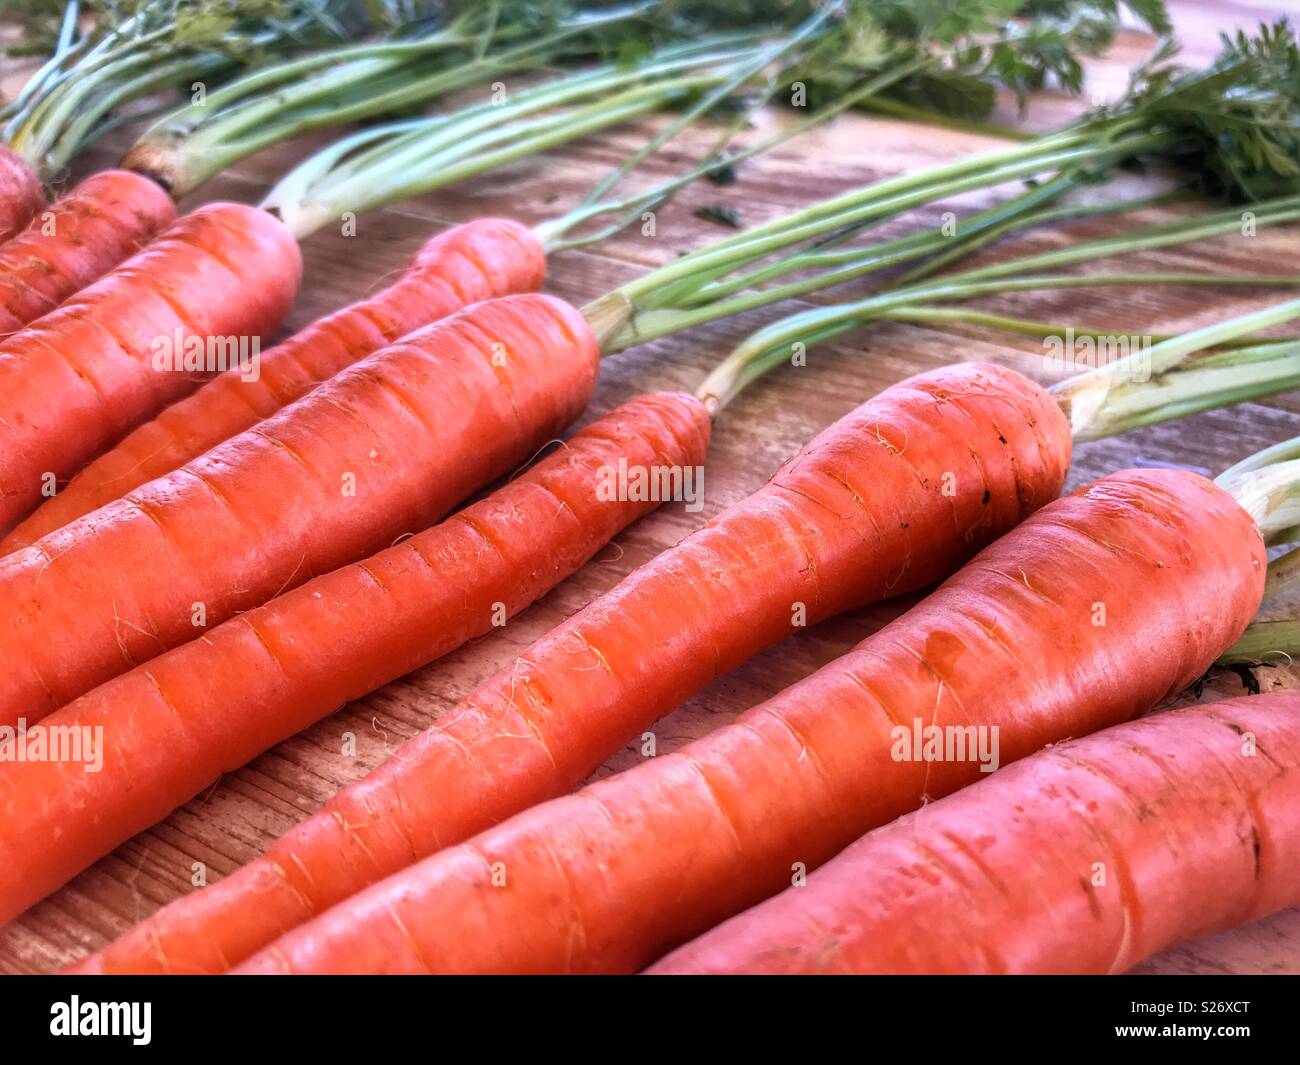 Fresh produce, Organic carrots with carrot greens, high angle view Stock Photo